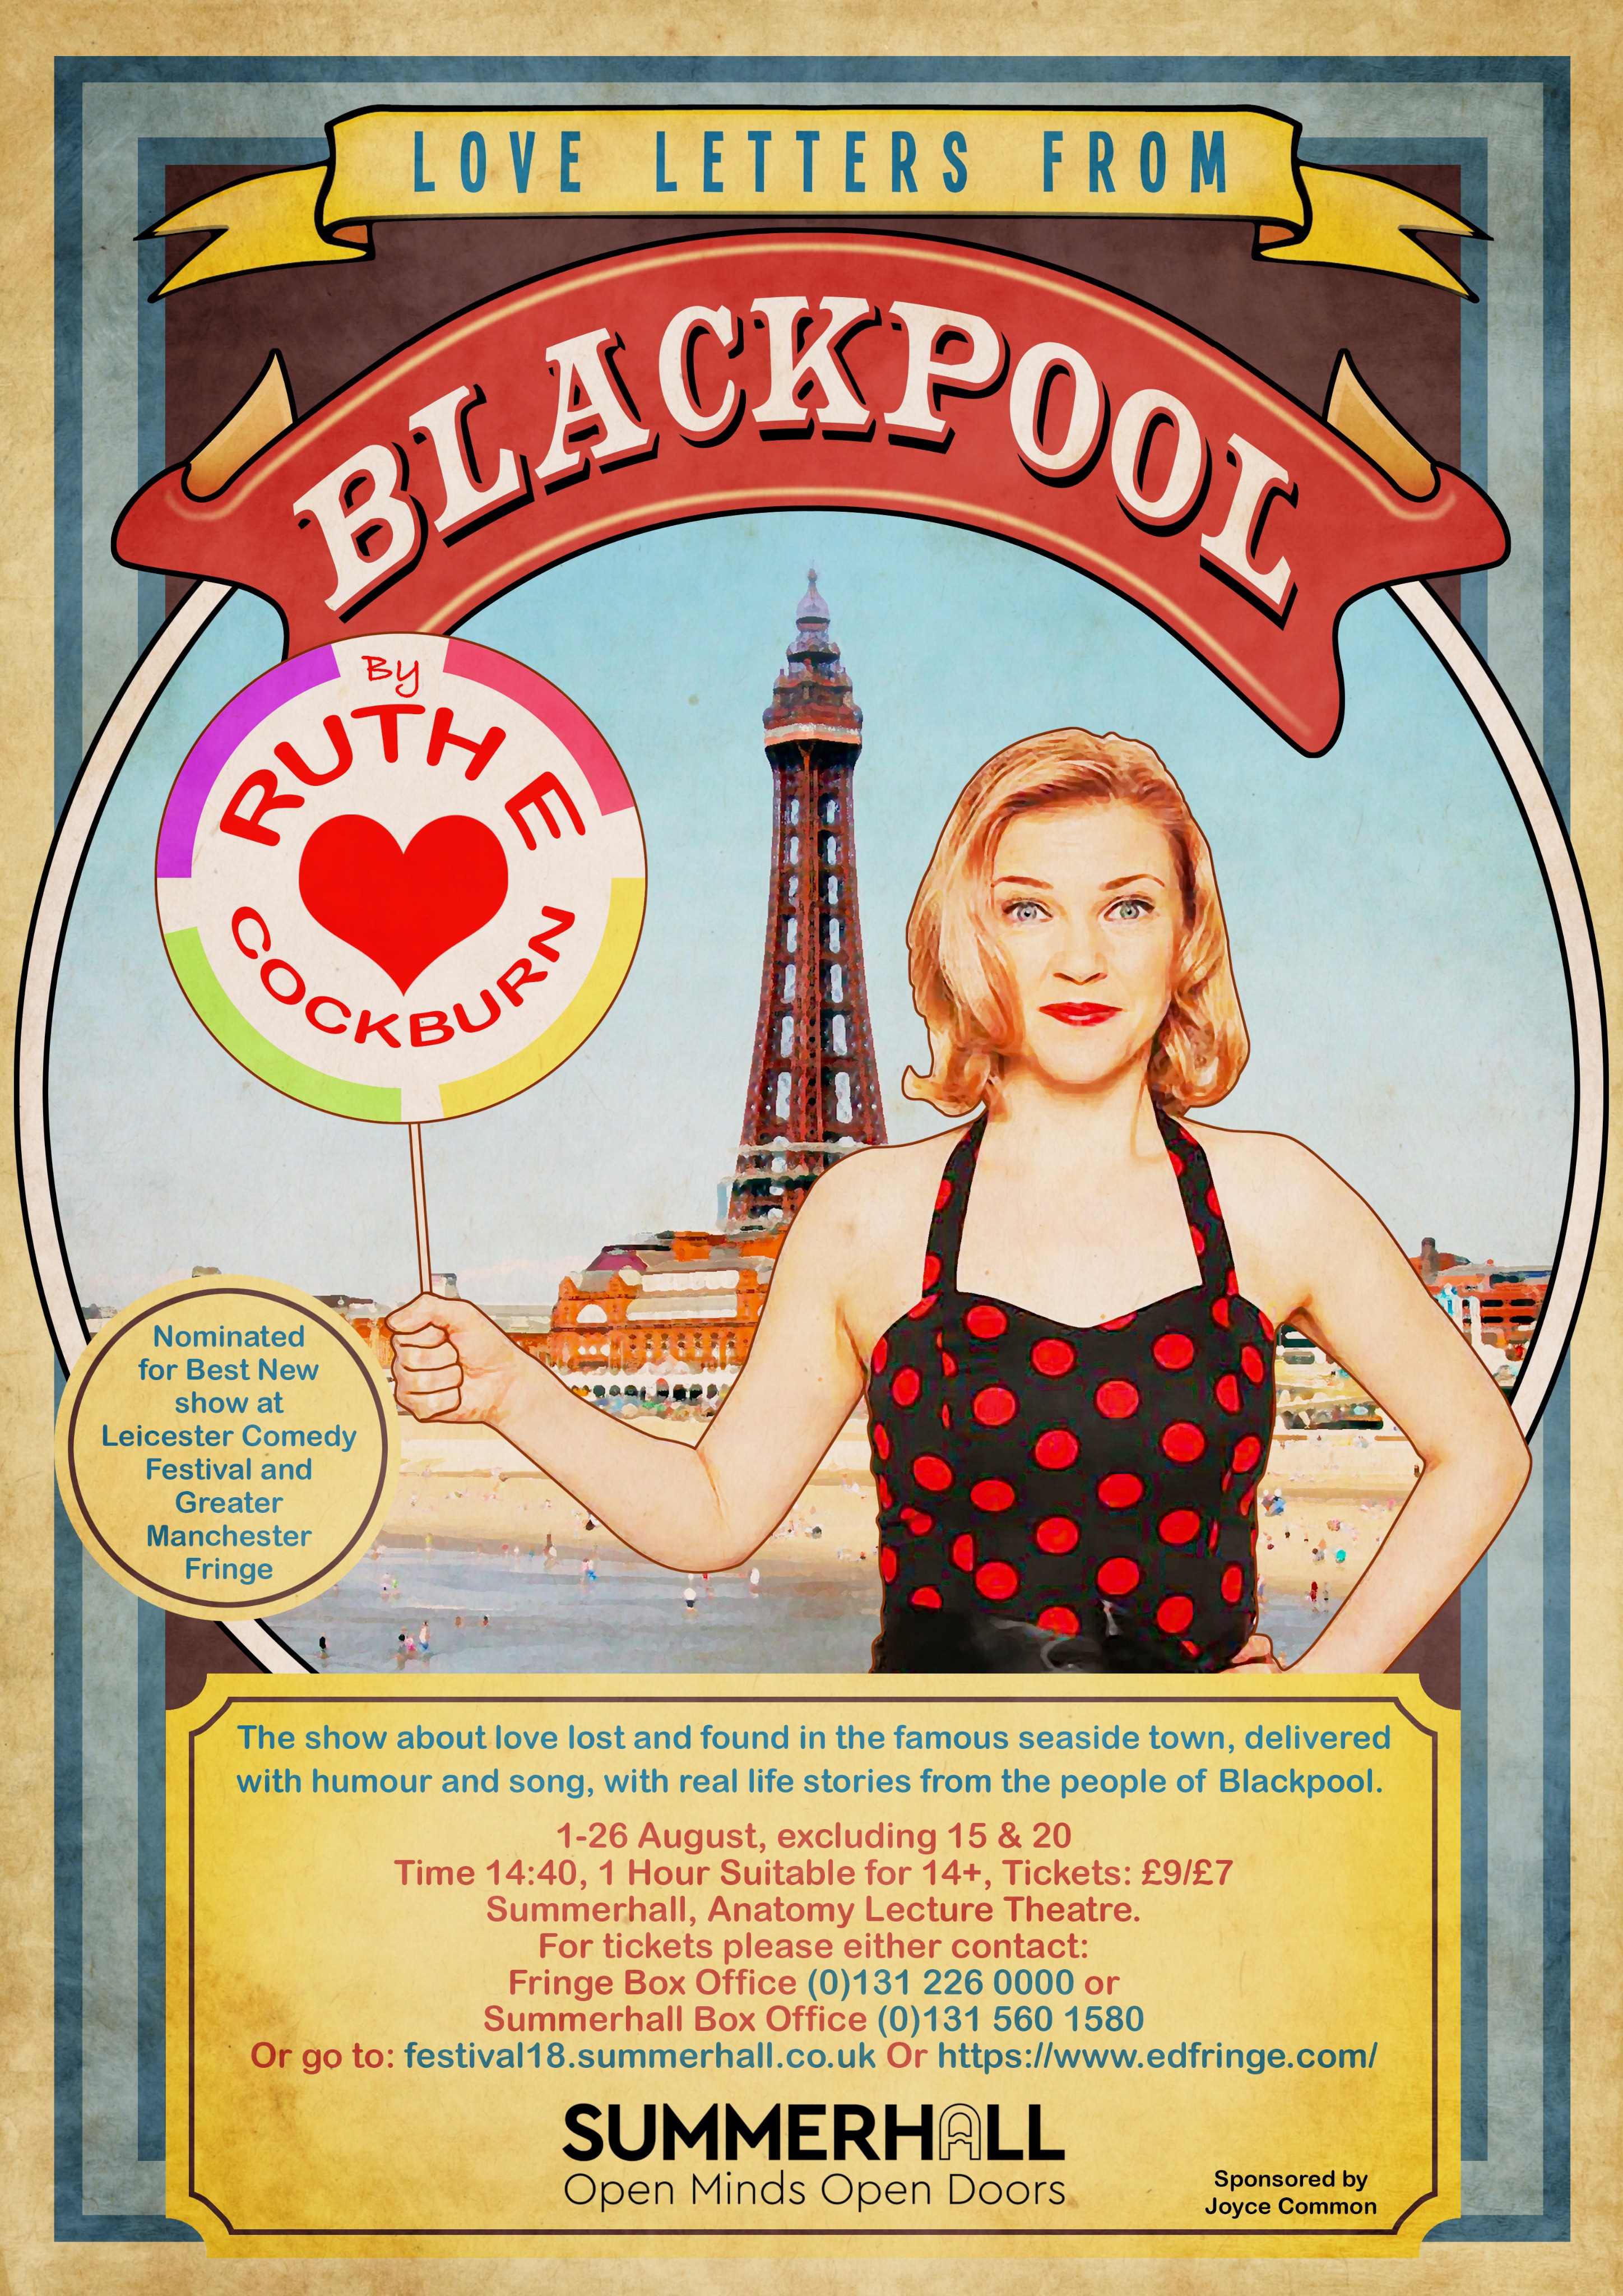 The poster for Ruth Cockburn - Love Letters From Blackpool